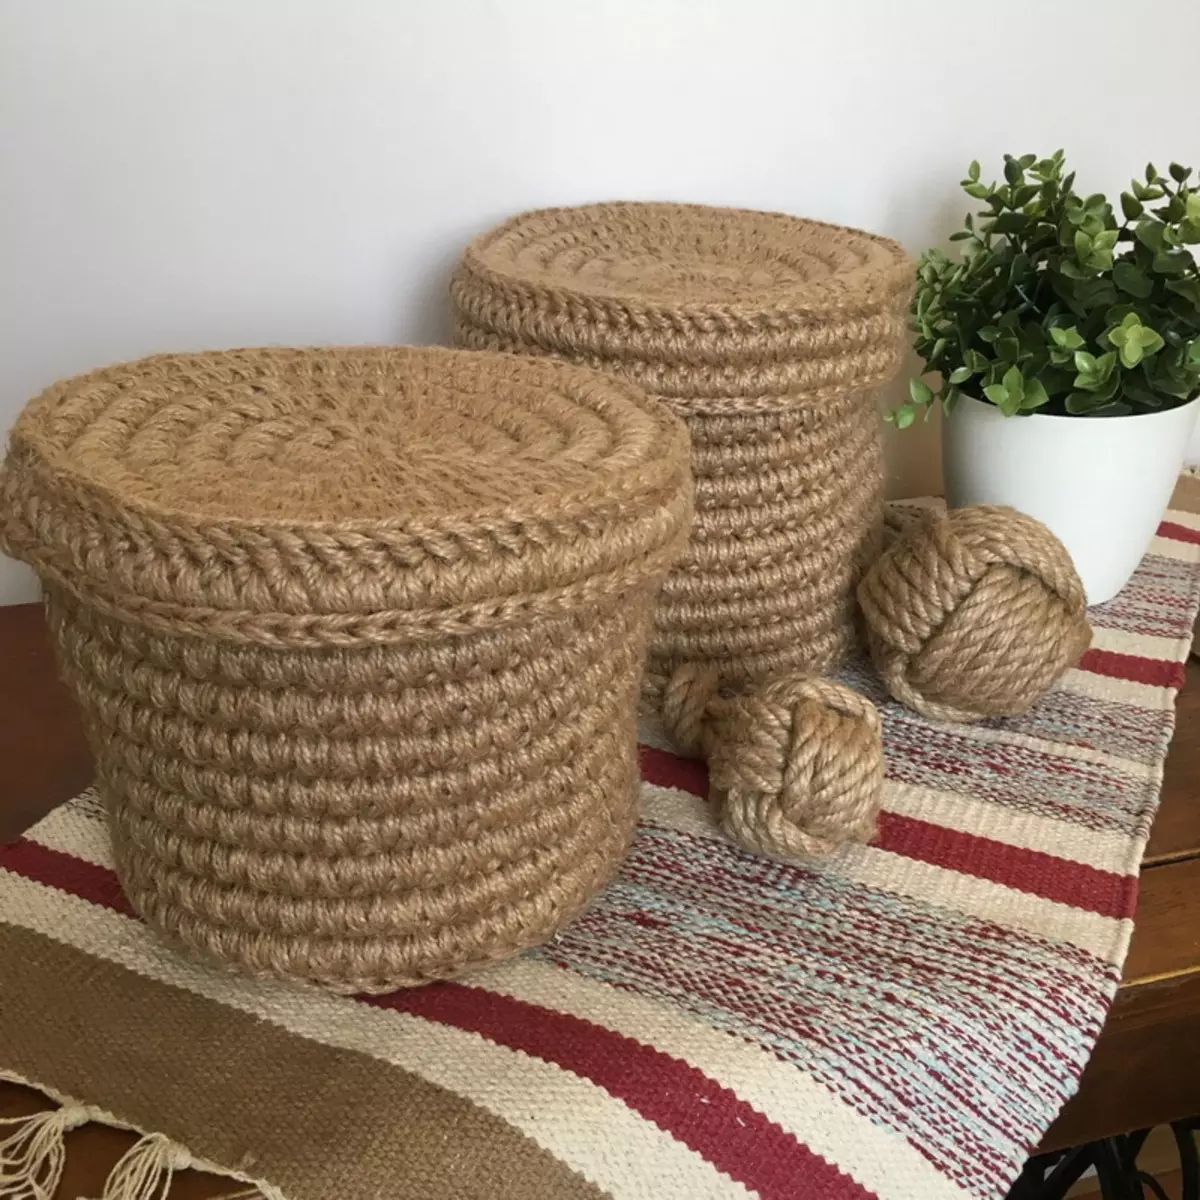 Baskets made of jute (49 photos): crochet baskets with your own hands, laundry basket with solid walls and other ideas, master classes 26917_6